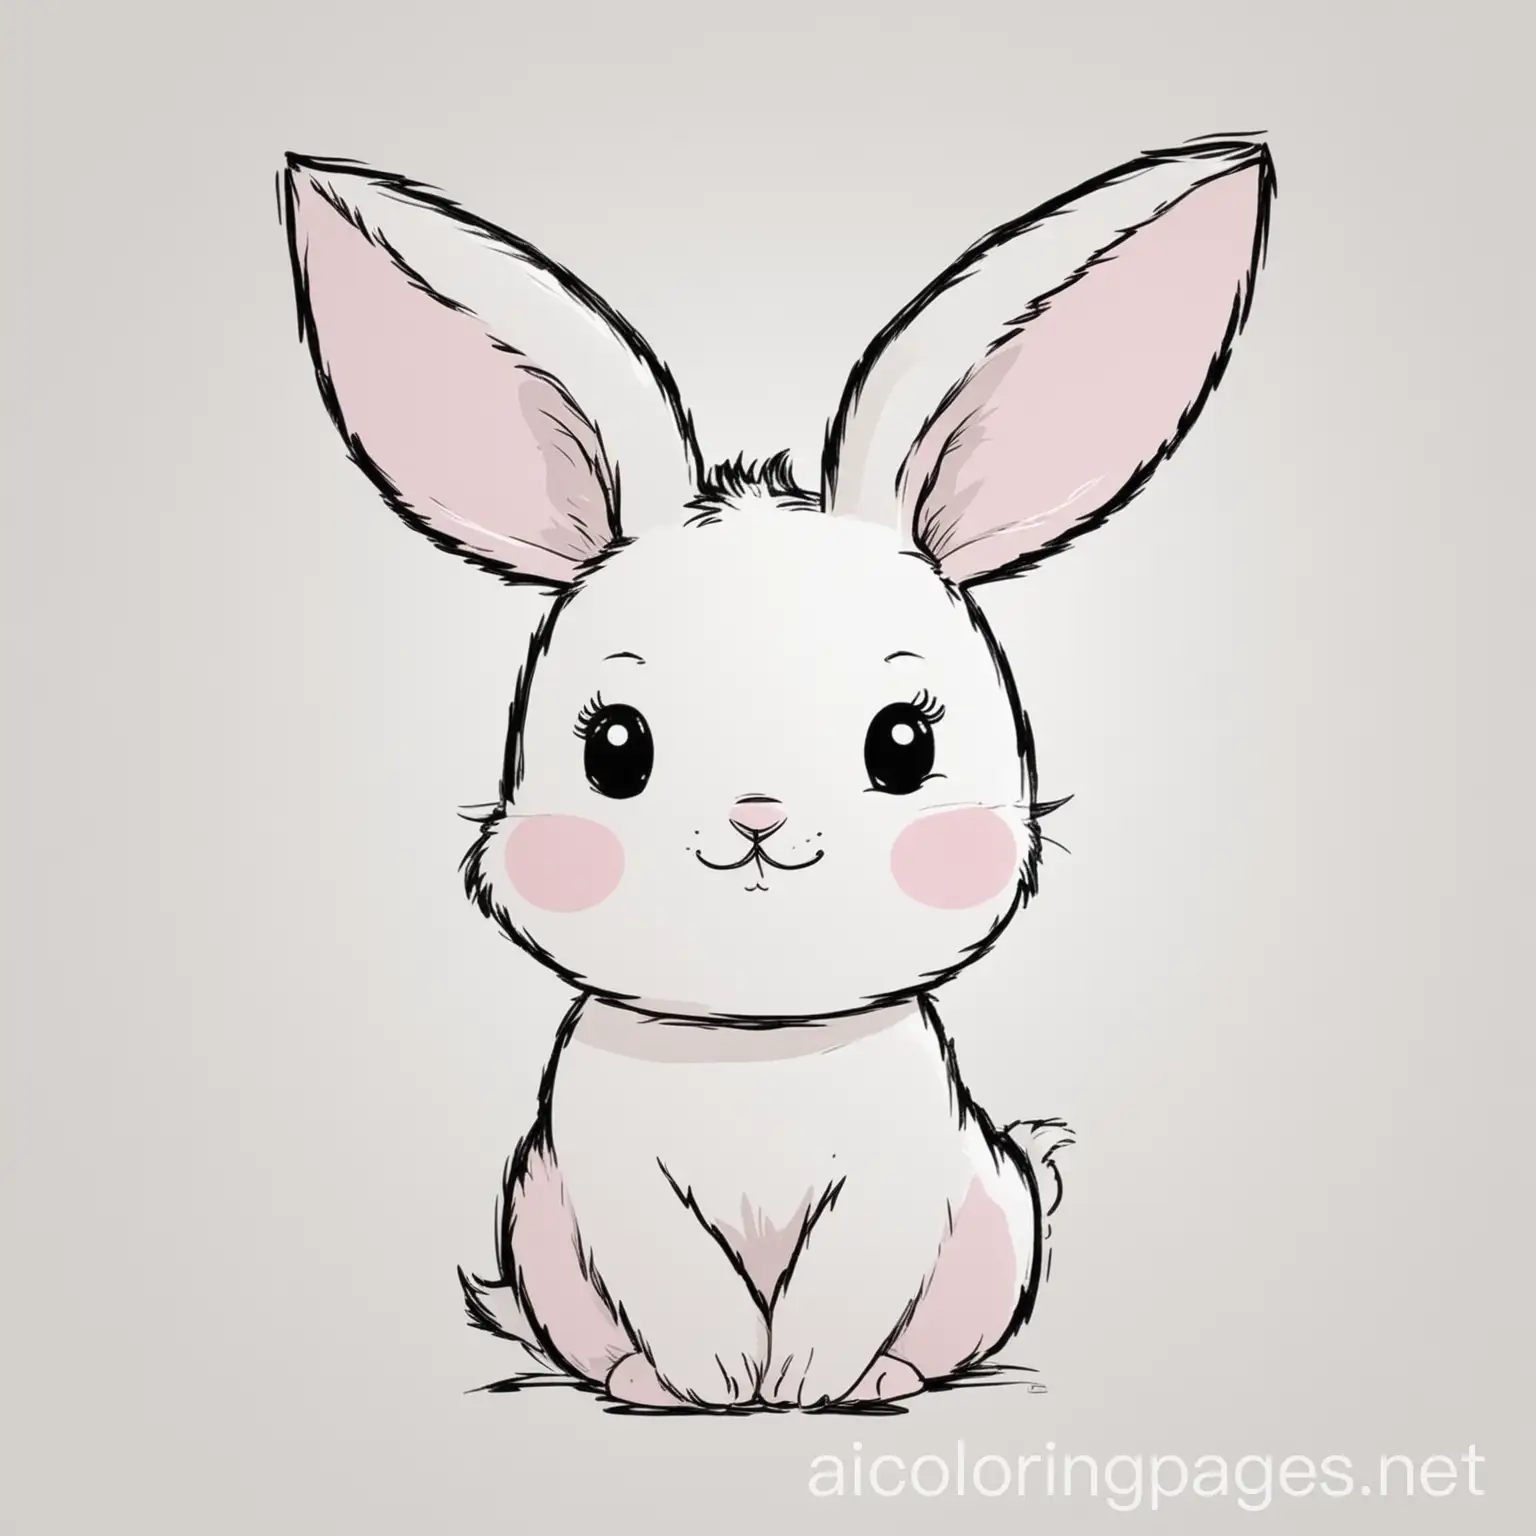 Pink bunny
, Coloring Page, black and white, line art, white background, Simplicity, Ample White Space. The background of the coloring page is plain white to make it easy for young children to color within the lines. The outlines of all the subjects are easy to distinguish, making it simple for kids to color without too much difficulty